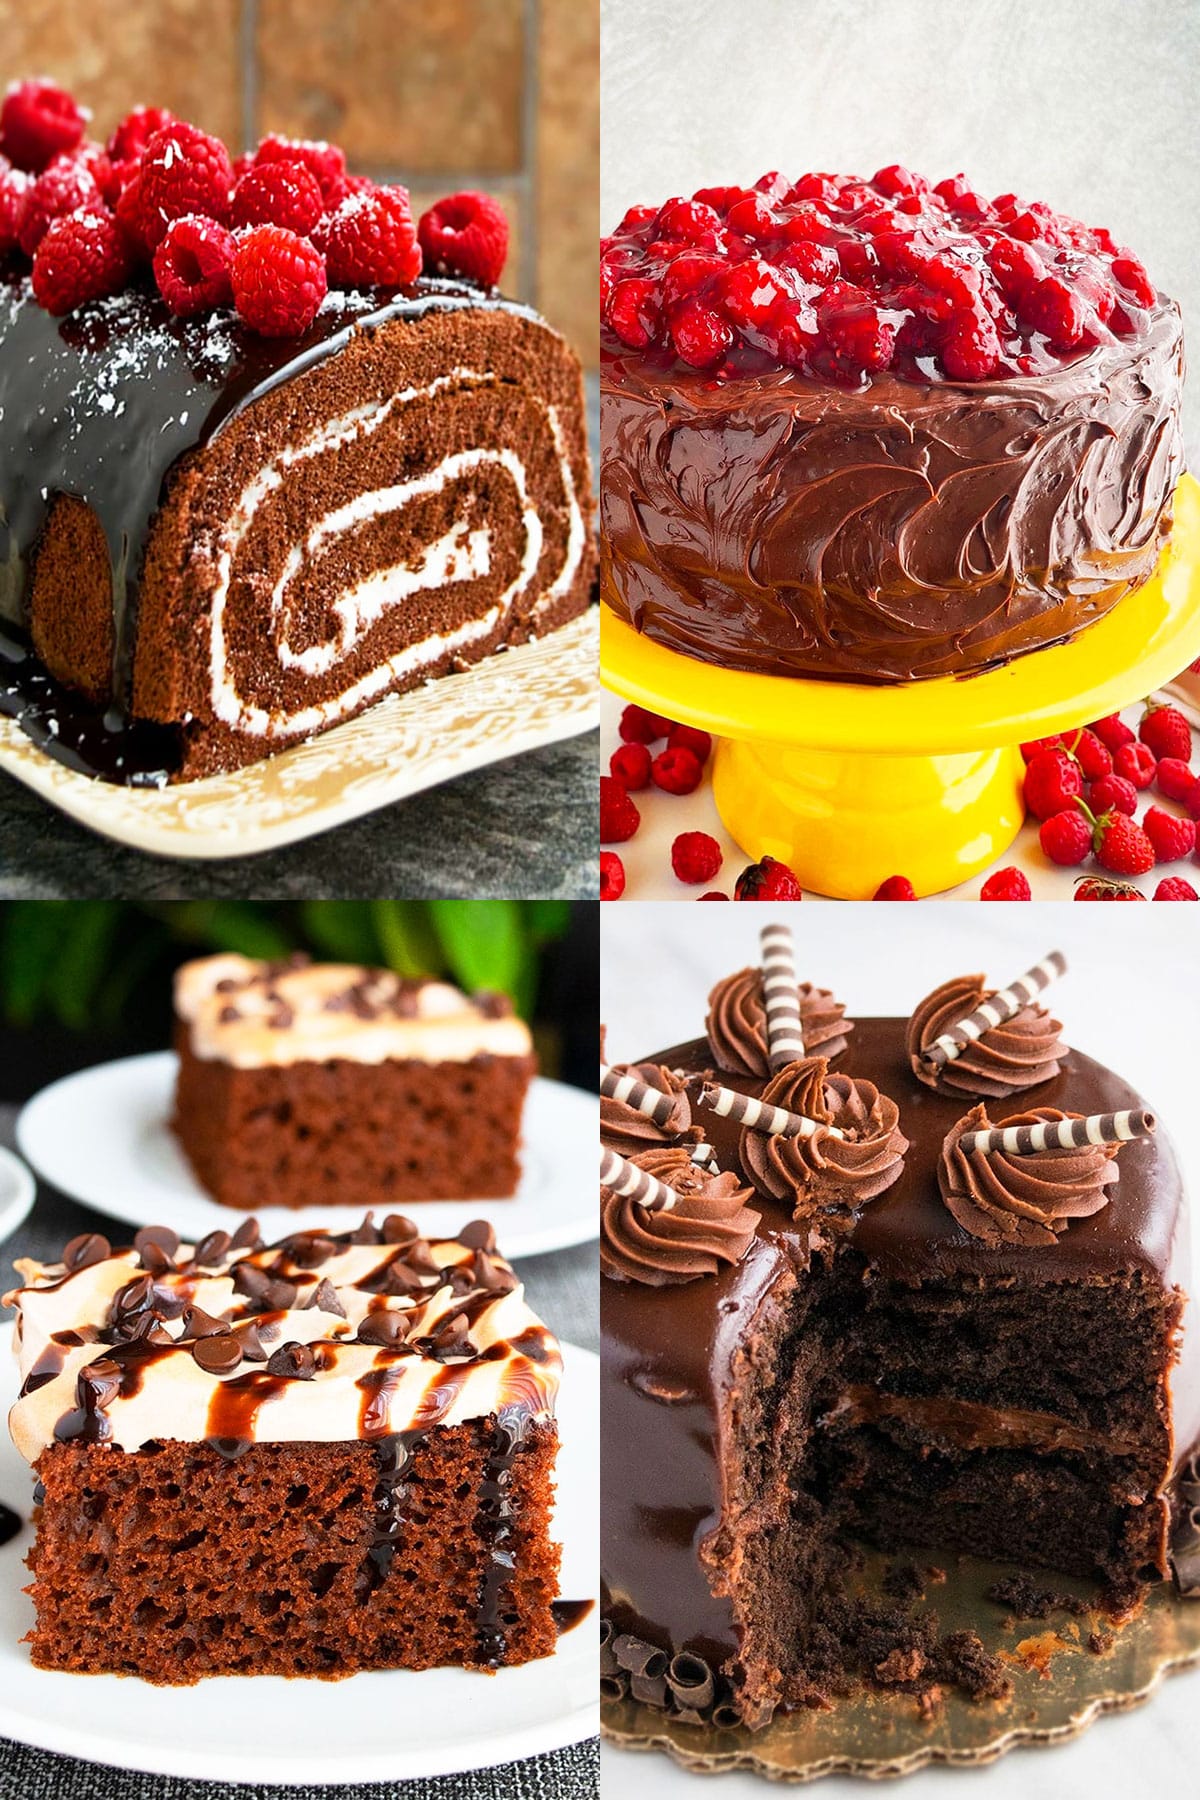 Collage Image With Many Easy Chocolate Cake Mix Recipes